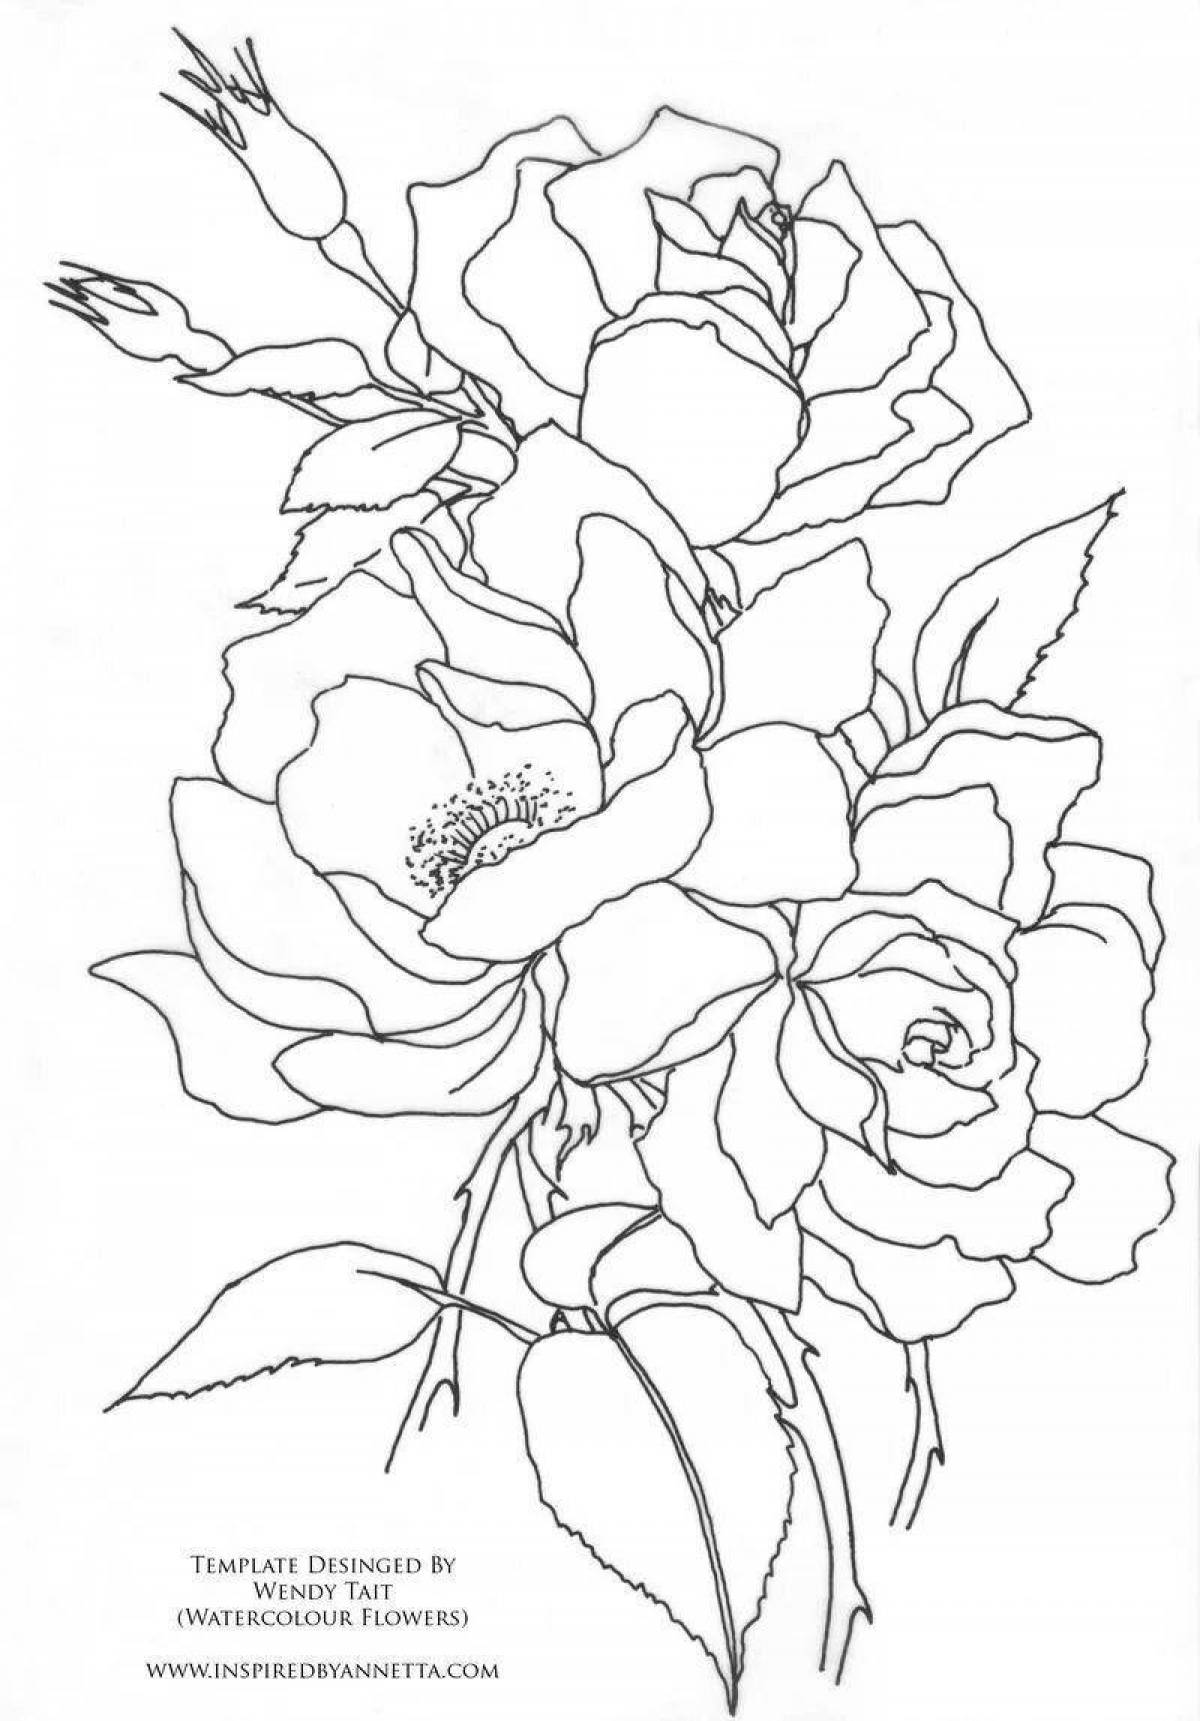 Amazing gouache coloring page